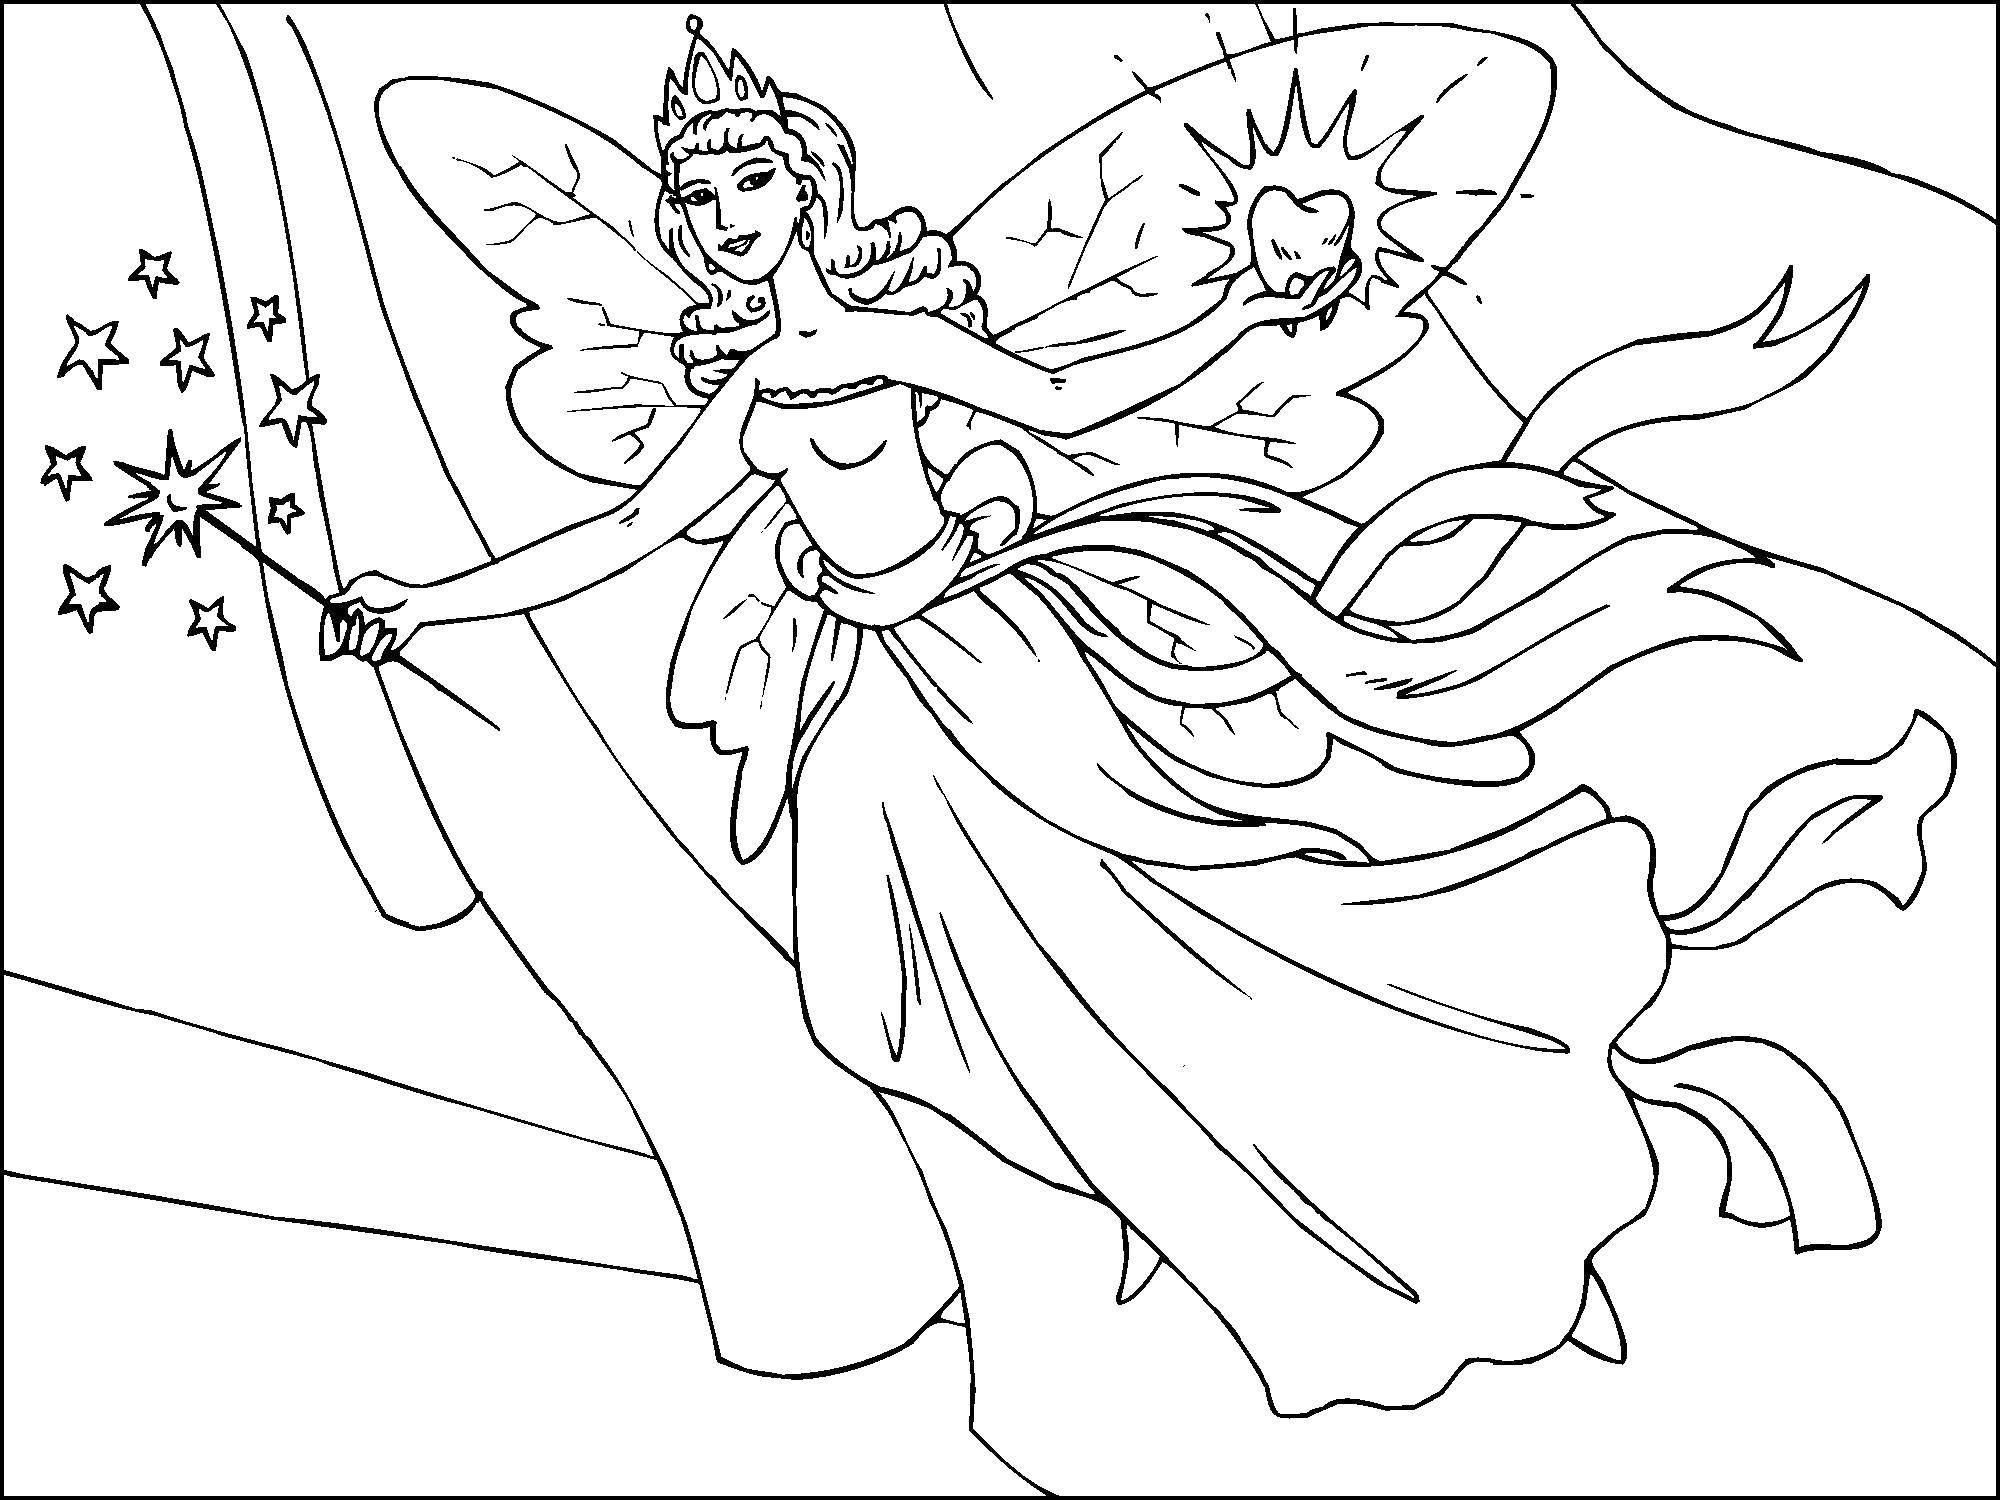 Coloring The tooth fairy. Category The care of teeth. Tags:  Fairy, tale.